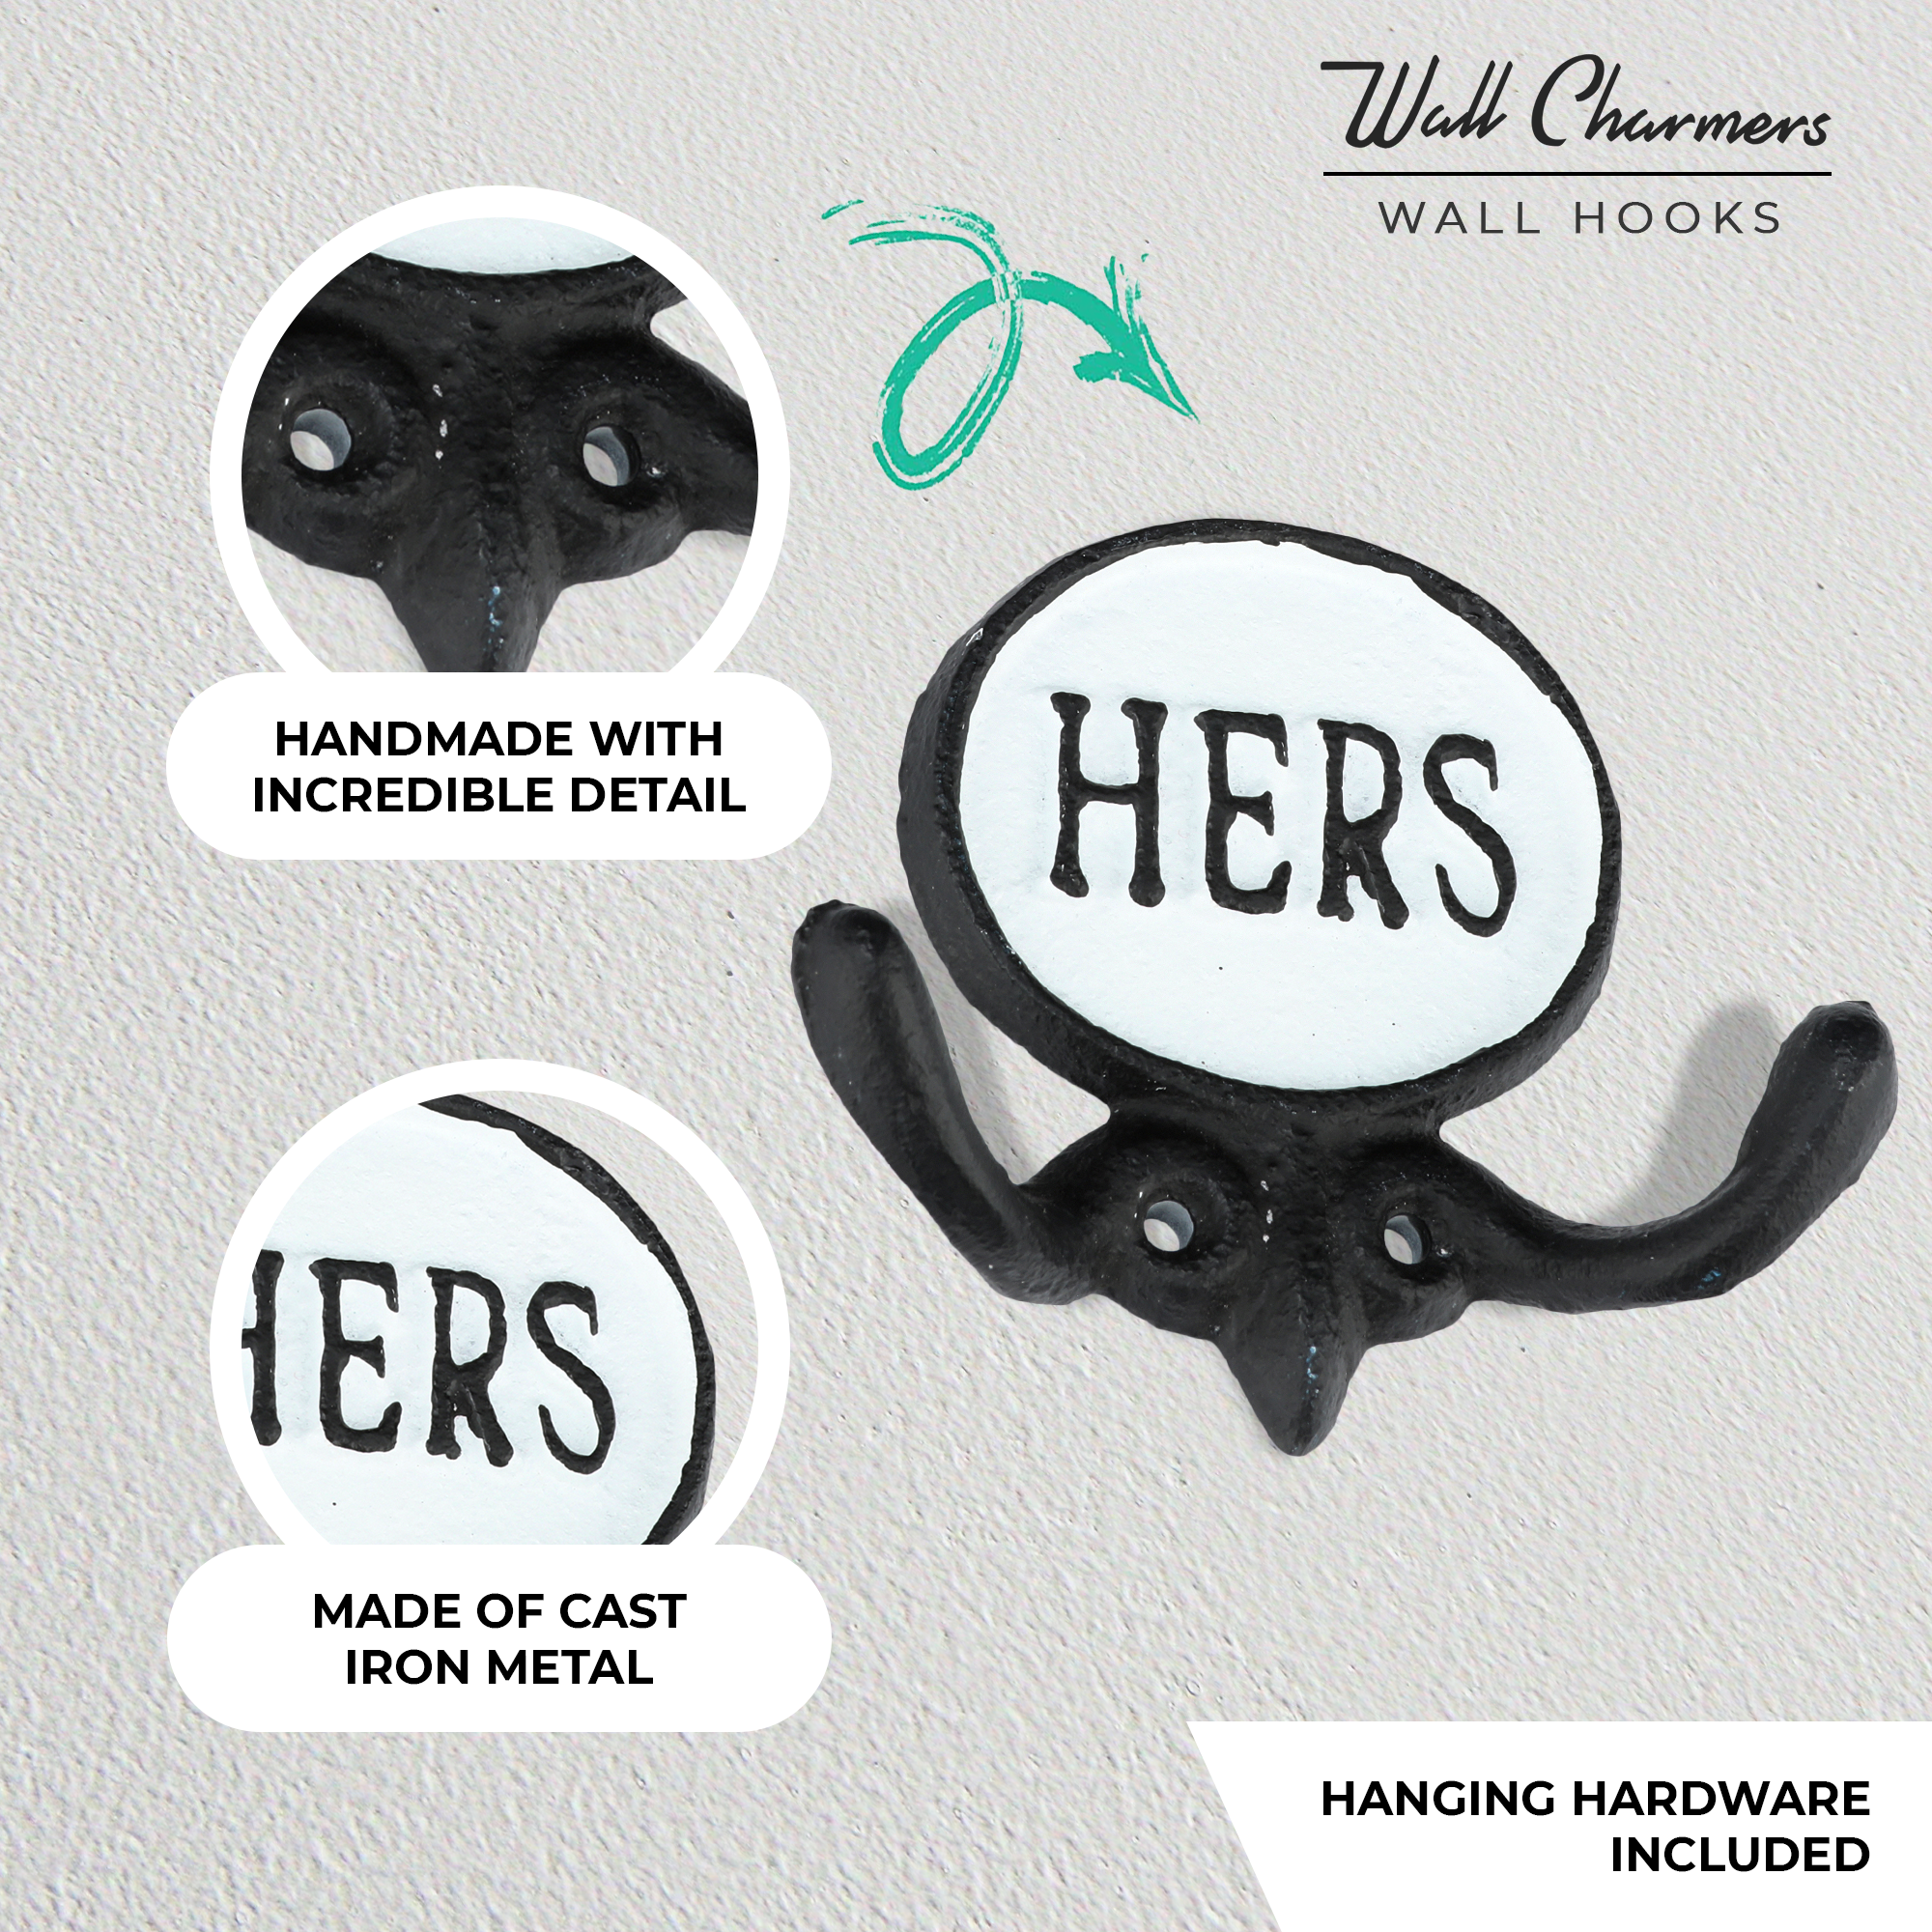 Set of 2 Black & White His and Hers Towel Hooks, 5.8"